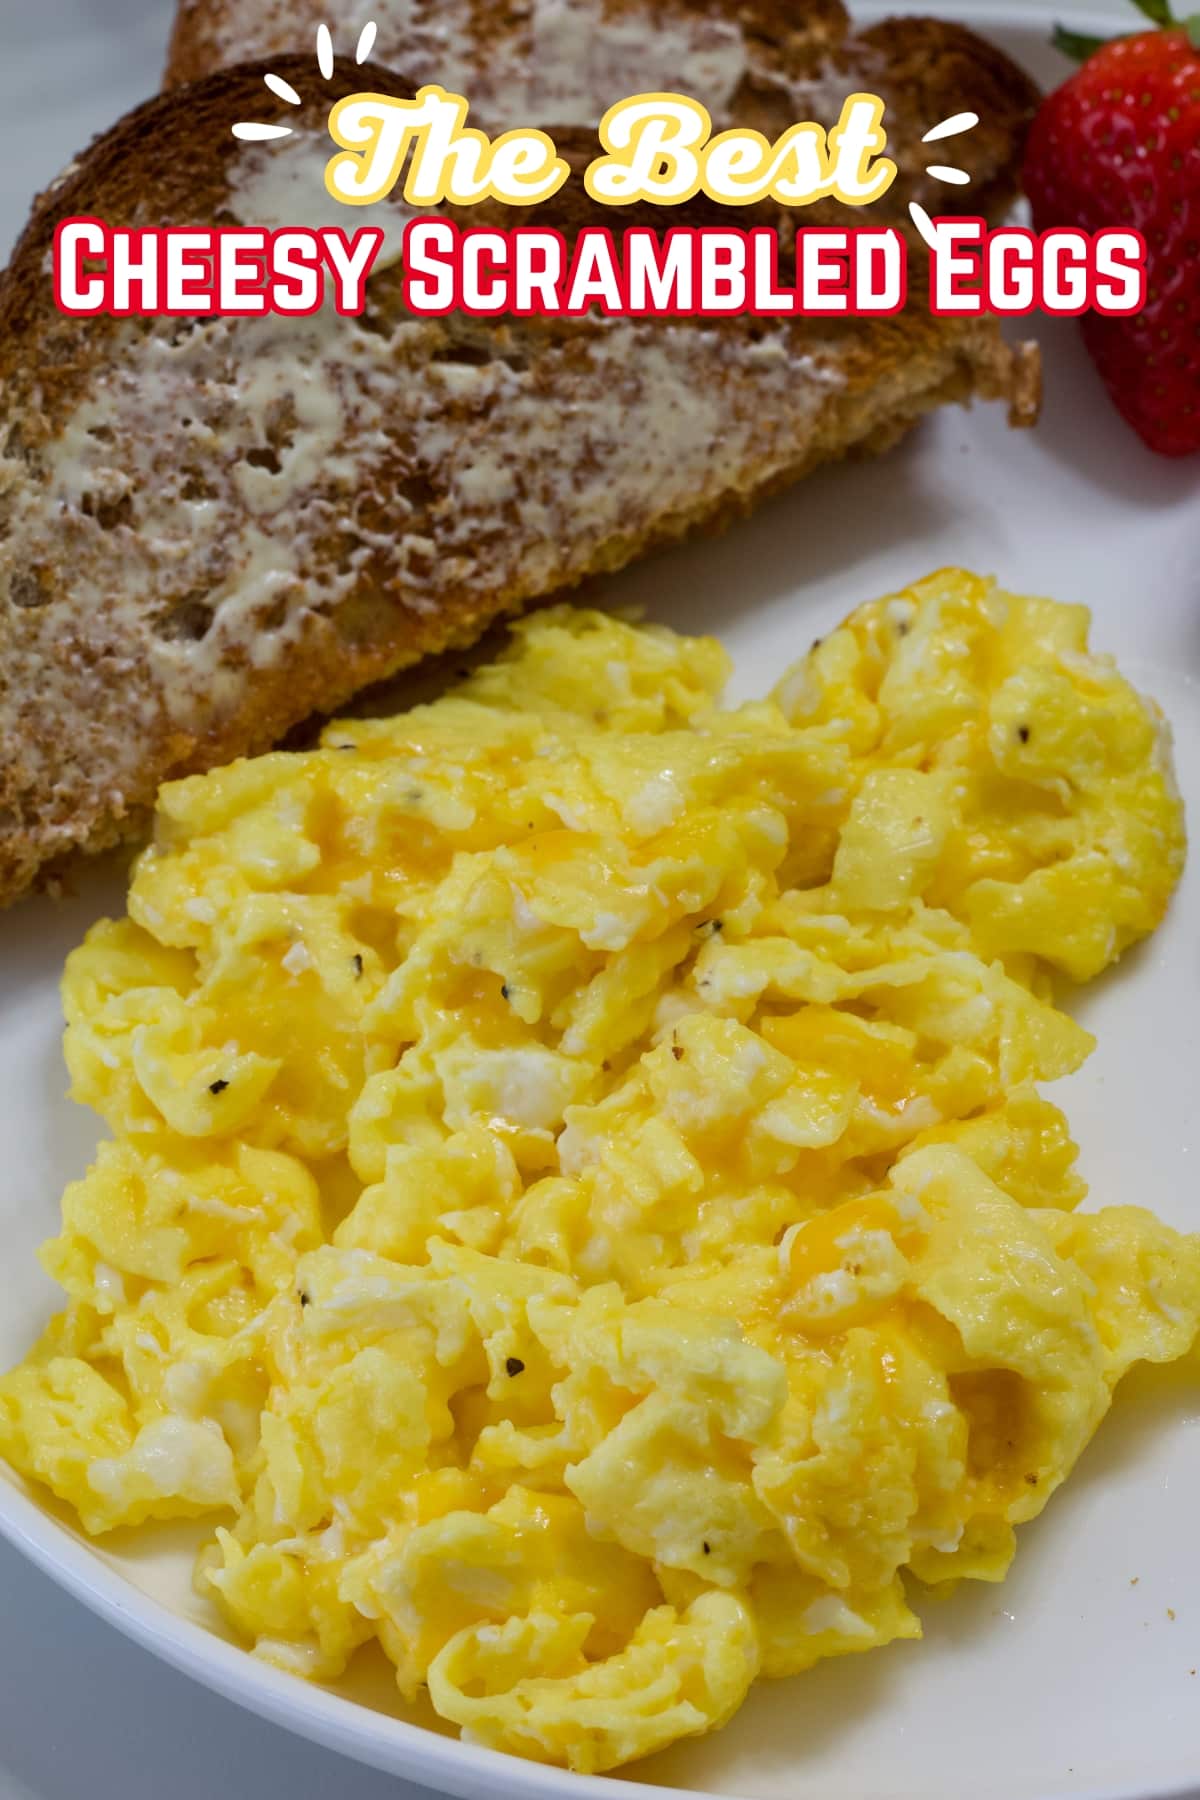 Cheese + Eggs = Perfection! Discover the Best Fluffy Scrambled Eggs with Cheese recipe that’s cooked in just 3 minutes. The perfect combo of eggs, butter, salt and pepper make delicious cheesy scrambled eggs! via @mindyscookingobsession